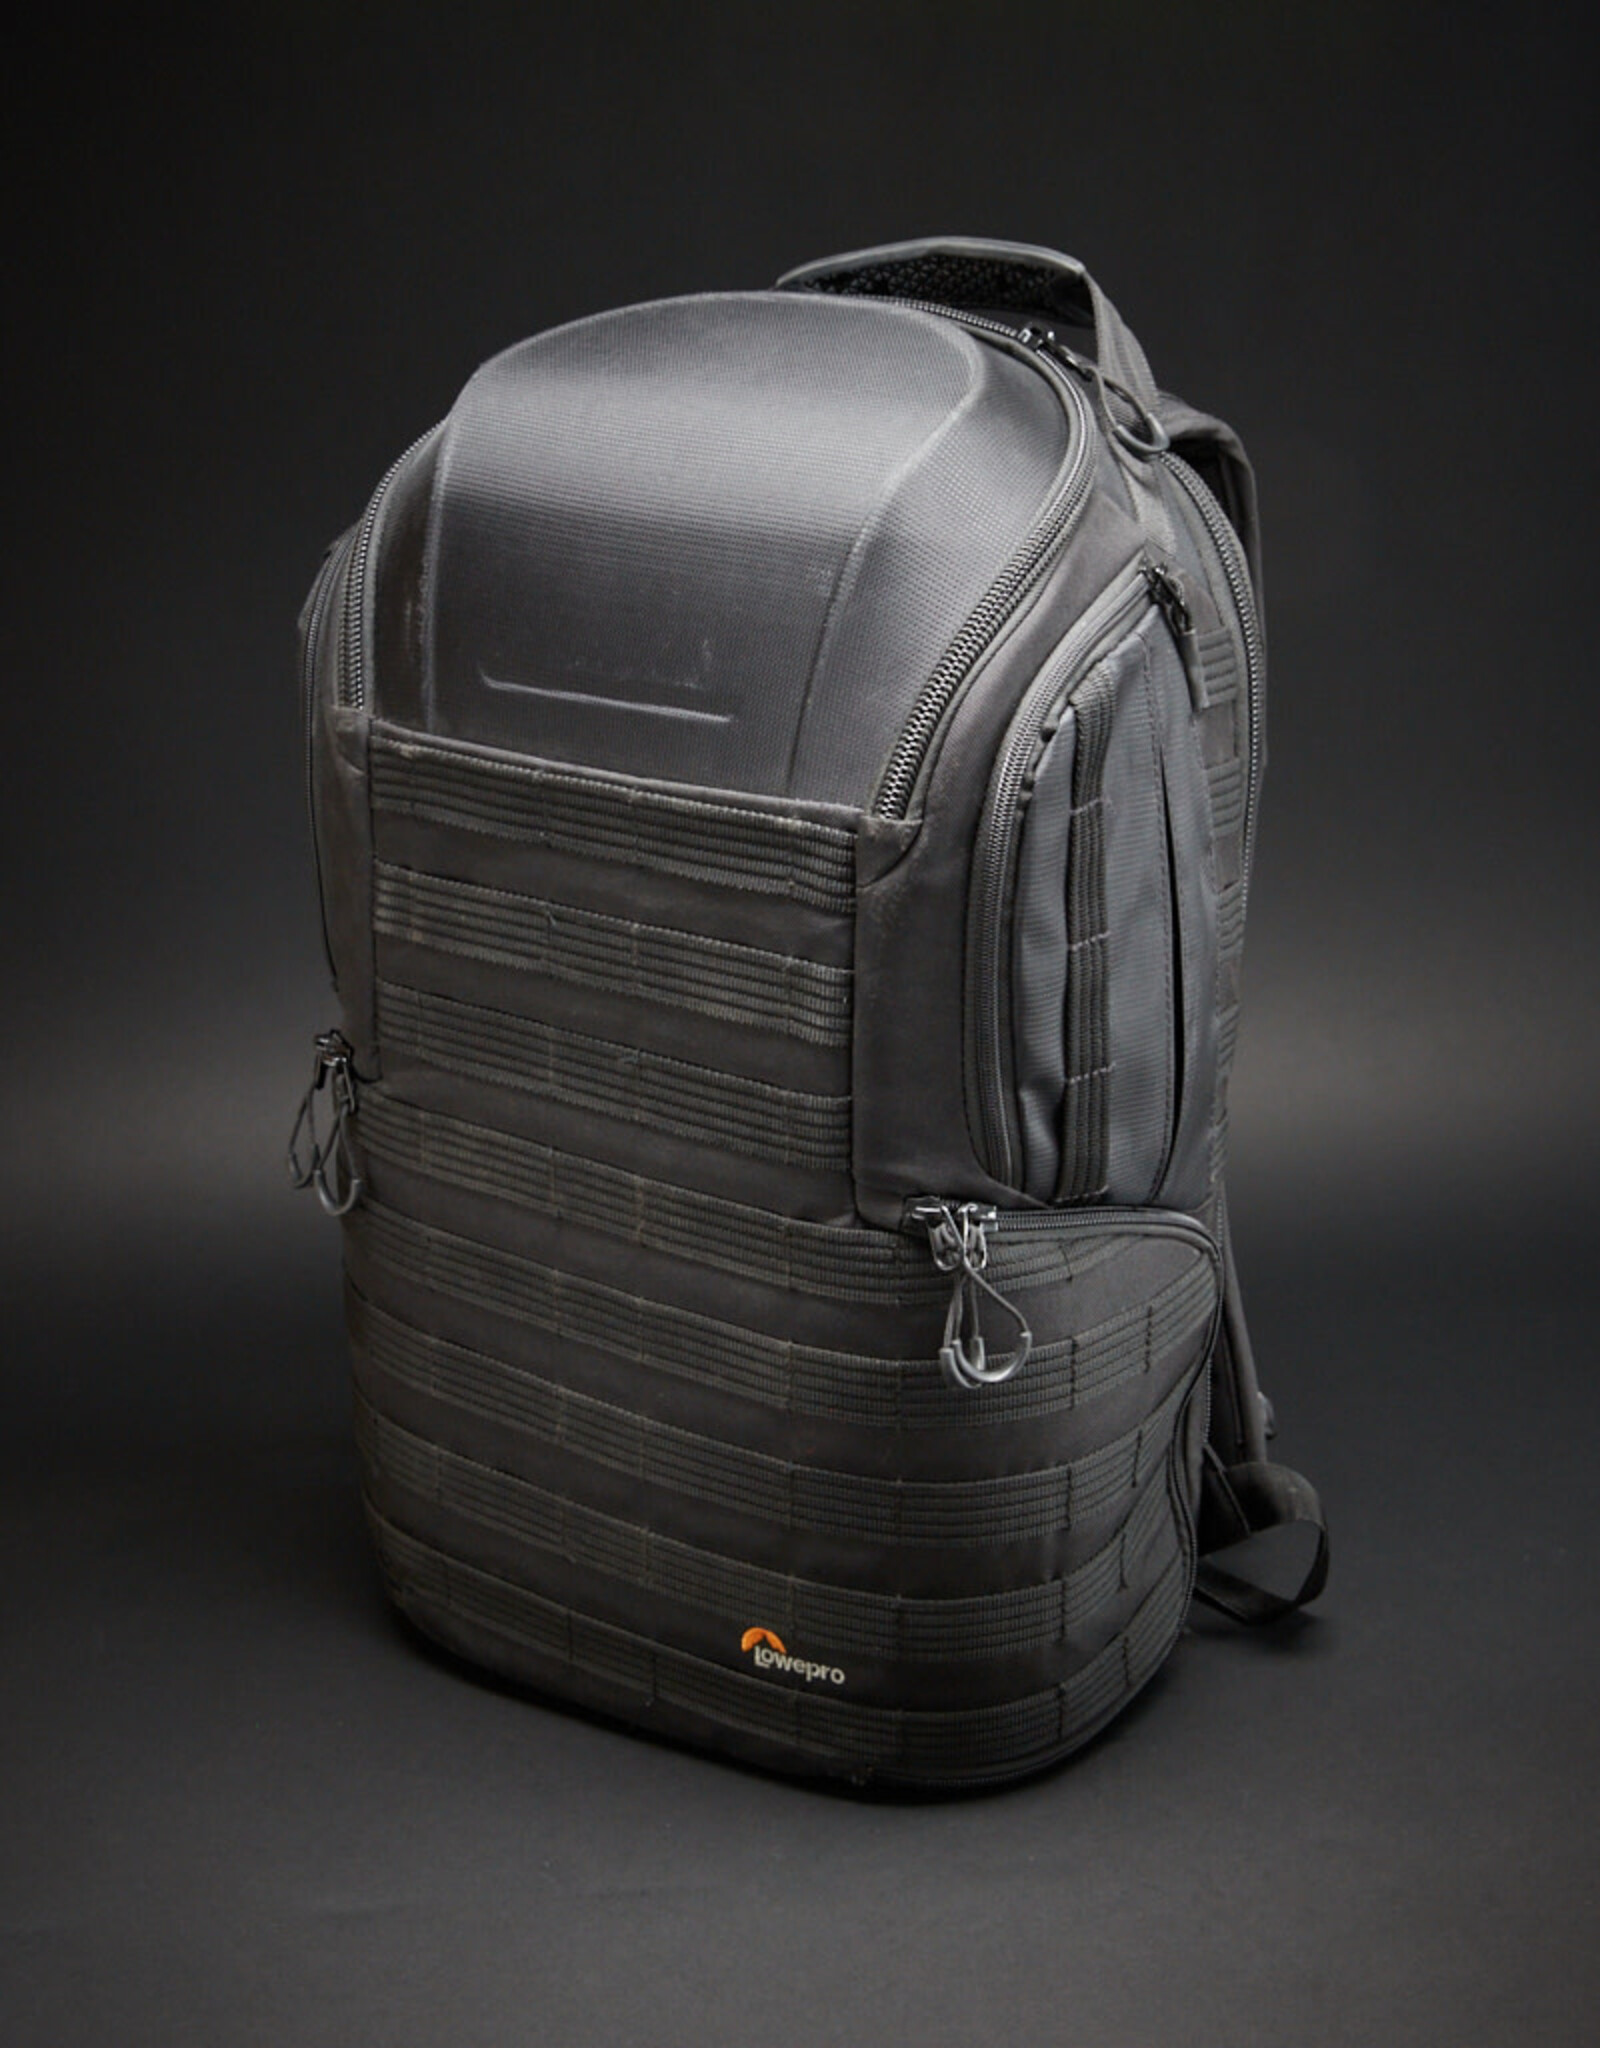 USED - LowePro Protactic BP 450 AW II Camera Backpack, no waist strap. Condition 8